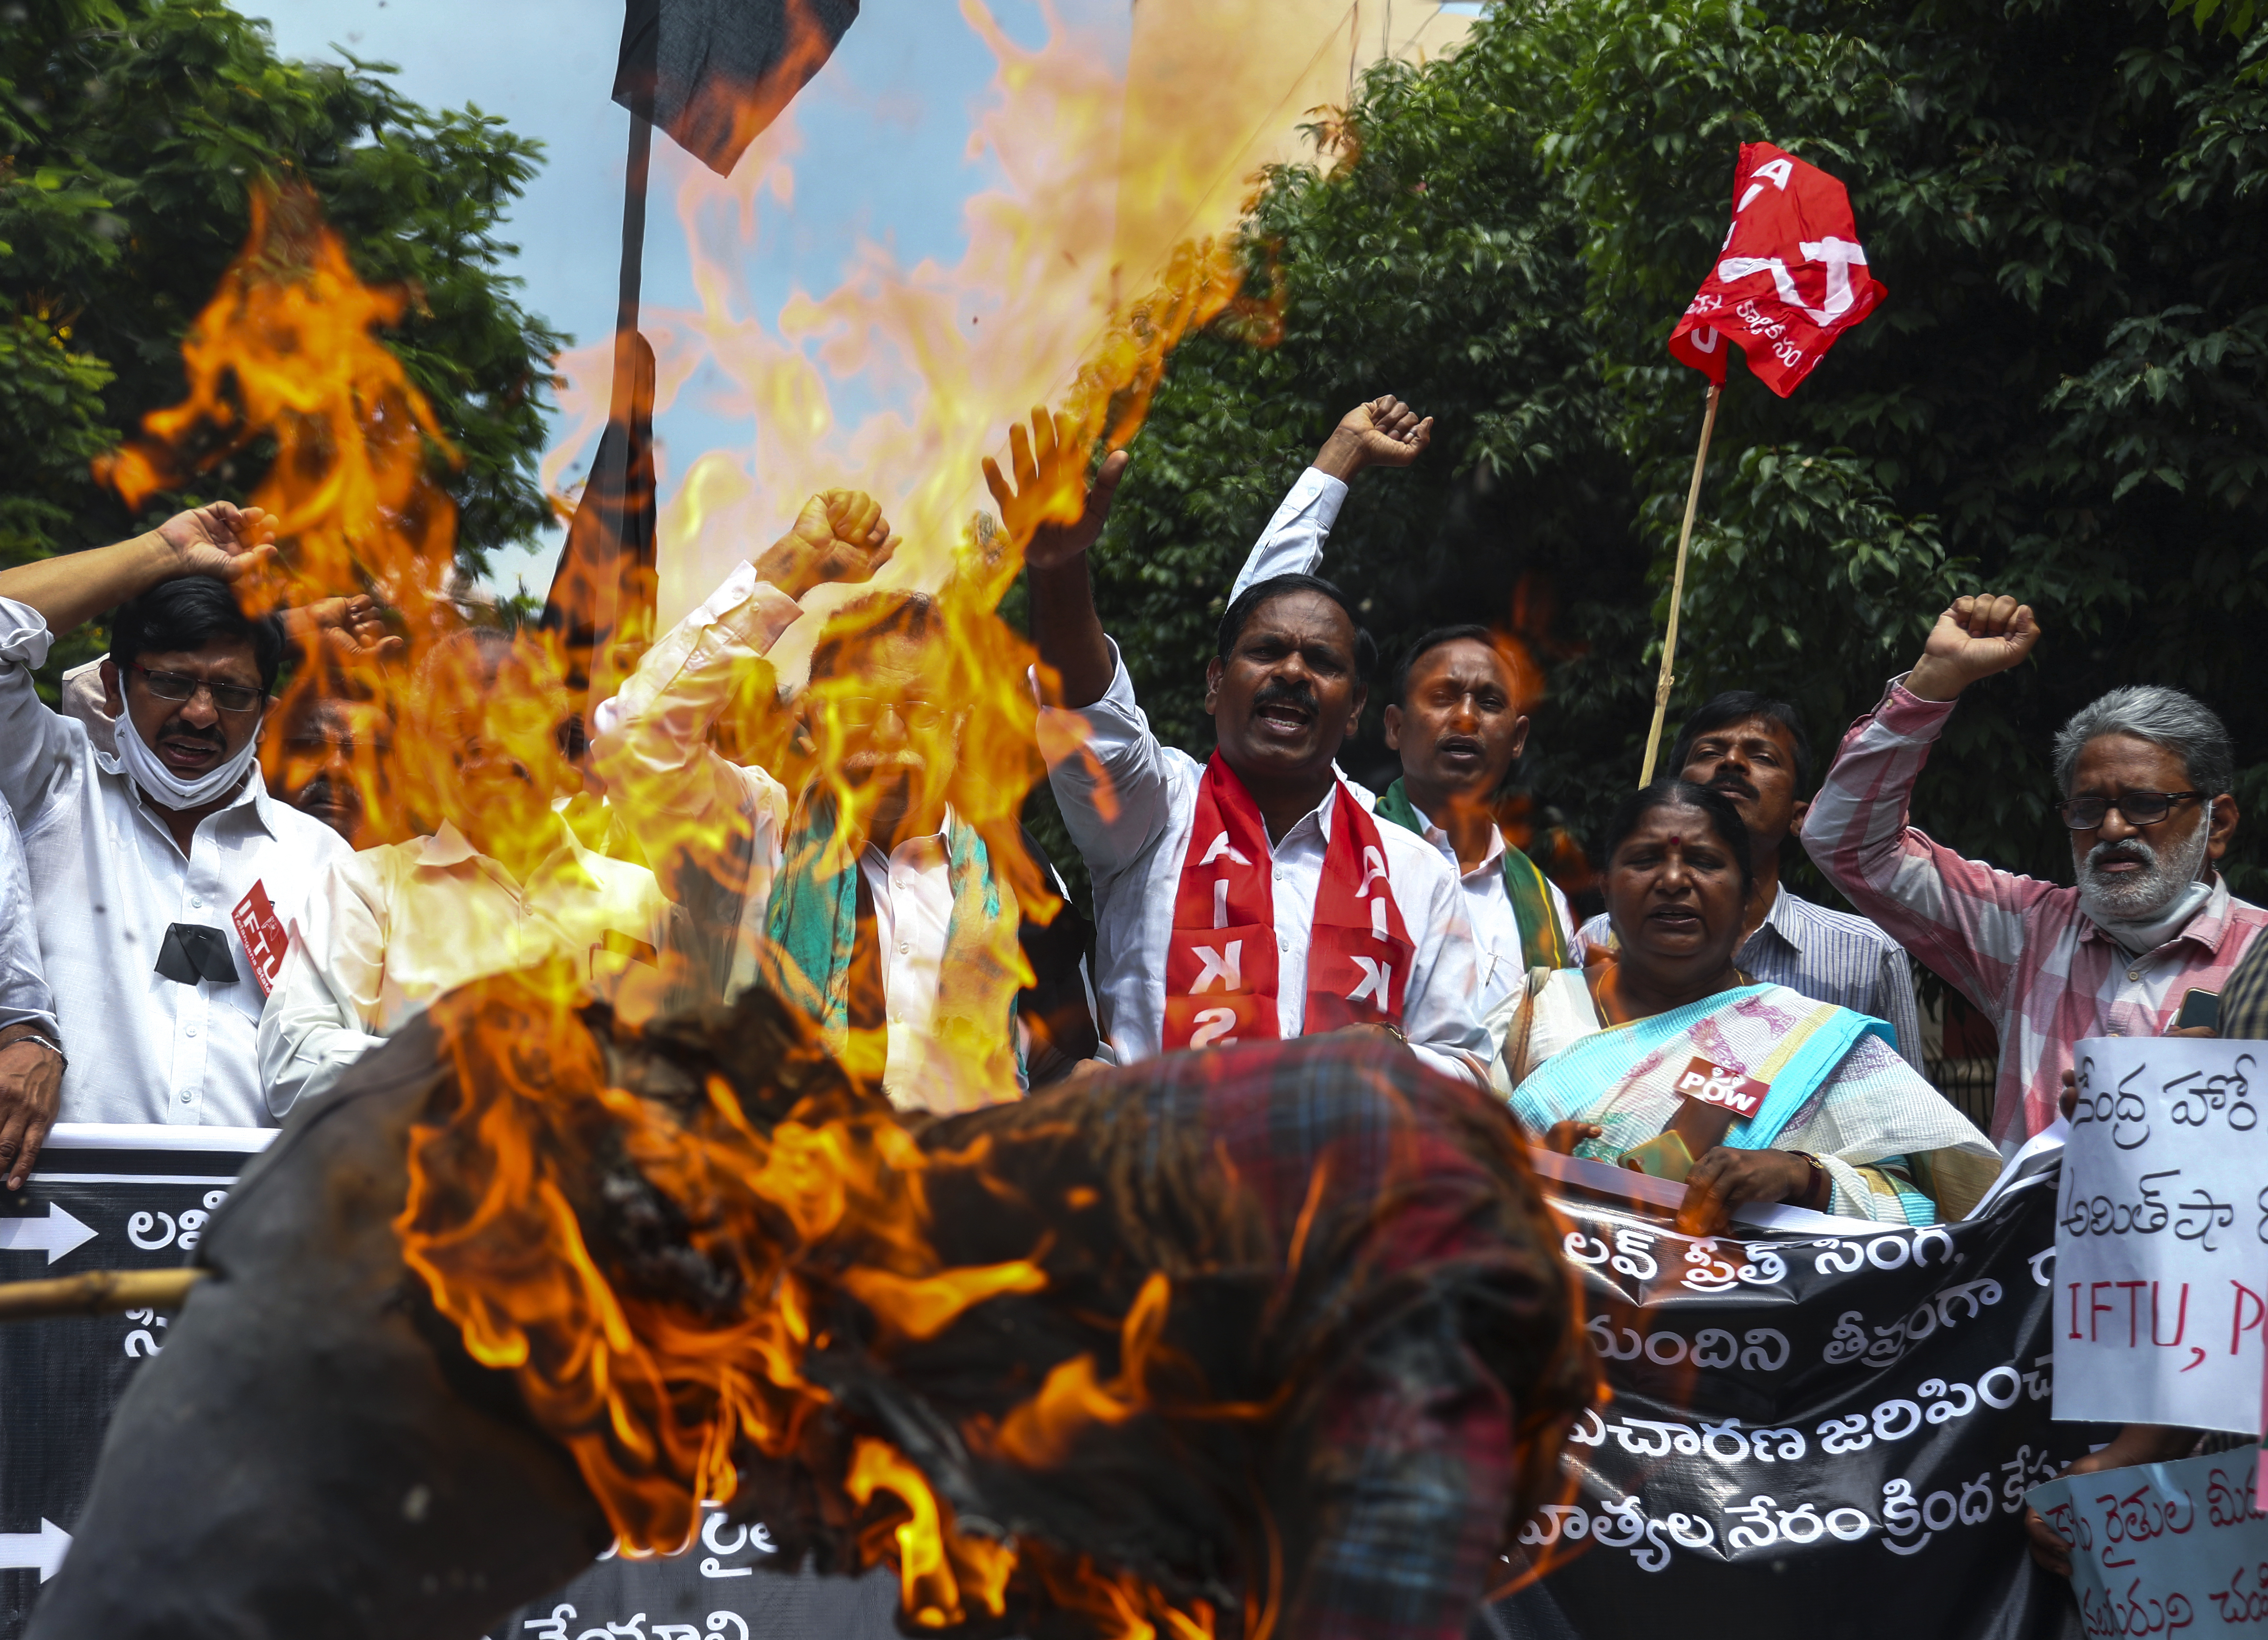 Indian farmers protesting against Sunday’s killing of four farmers in Uttar Pradesh state after being run over by a car owned by India's junior Home Minister Ajay Mishra burn an effigy of the federal government in Hyderabad, India, Monday, Oct. 4, 2021. Indian authorities on Monday suspended Internet services and barred political leaders from entering a northern town to calm tensions after eight people were killed in a deadly escalation of a year-long demonstration against contentious agriculture laws. (AP Photo/Mahesh Kumar A.)